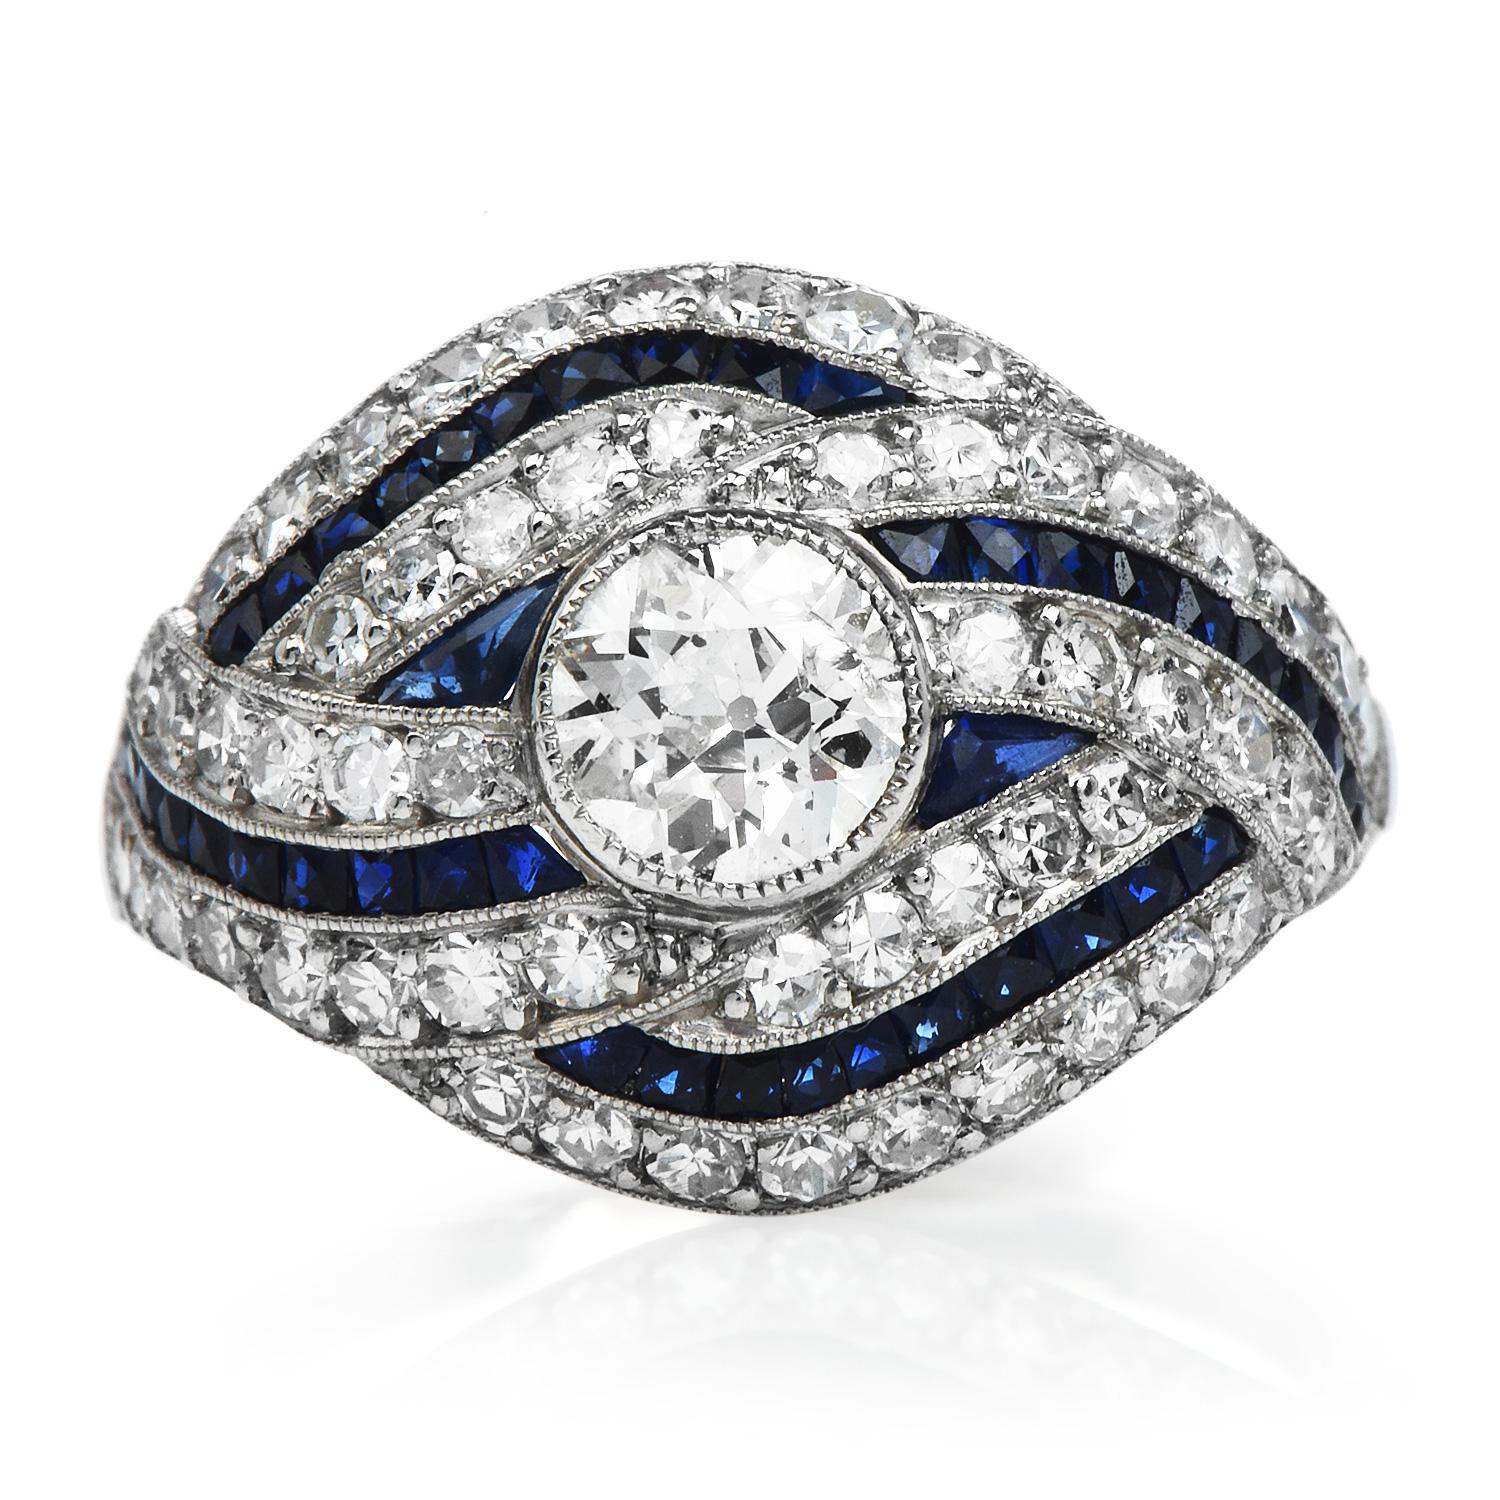 A visionary design motivated this Art Deco motif and crafted in Platinum.

Featuring a round bezel set European cut diamond in

 The center is weighing appx. 0.70 carats and graded as I color and SI1 clarity.

68 Bright, vibrant blue French-cut